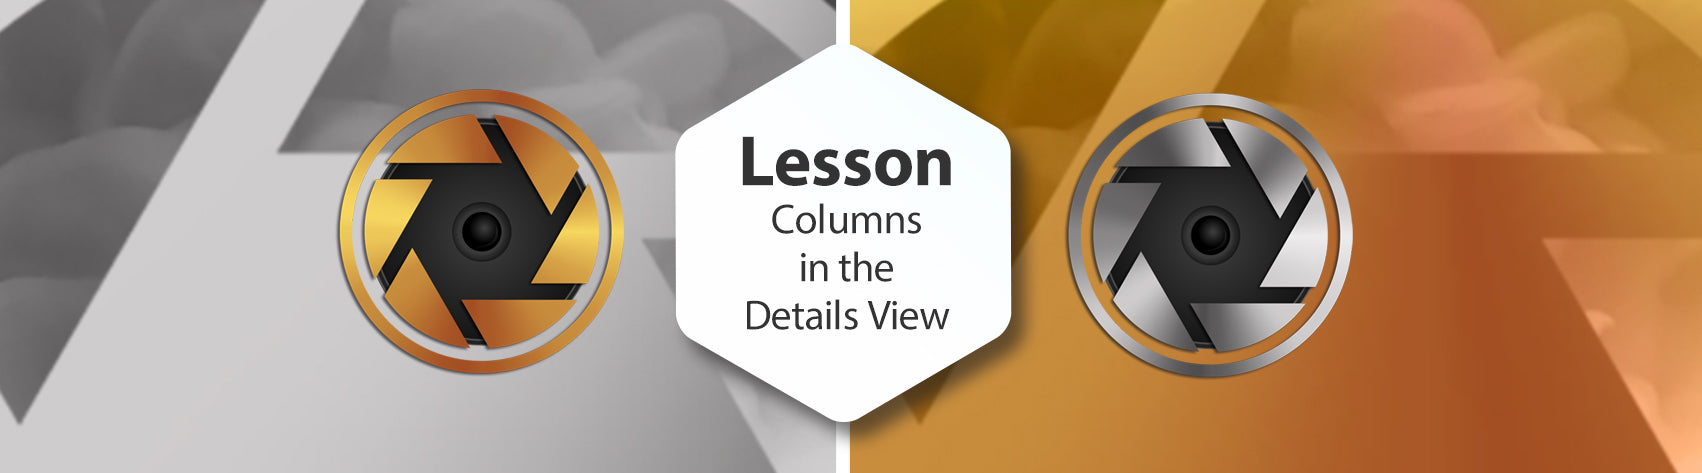 Lesson - Columns in the Details View